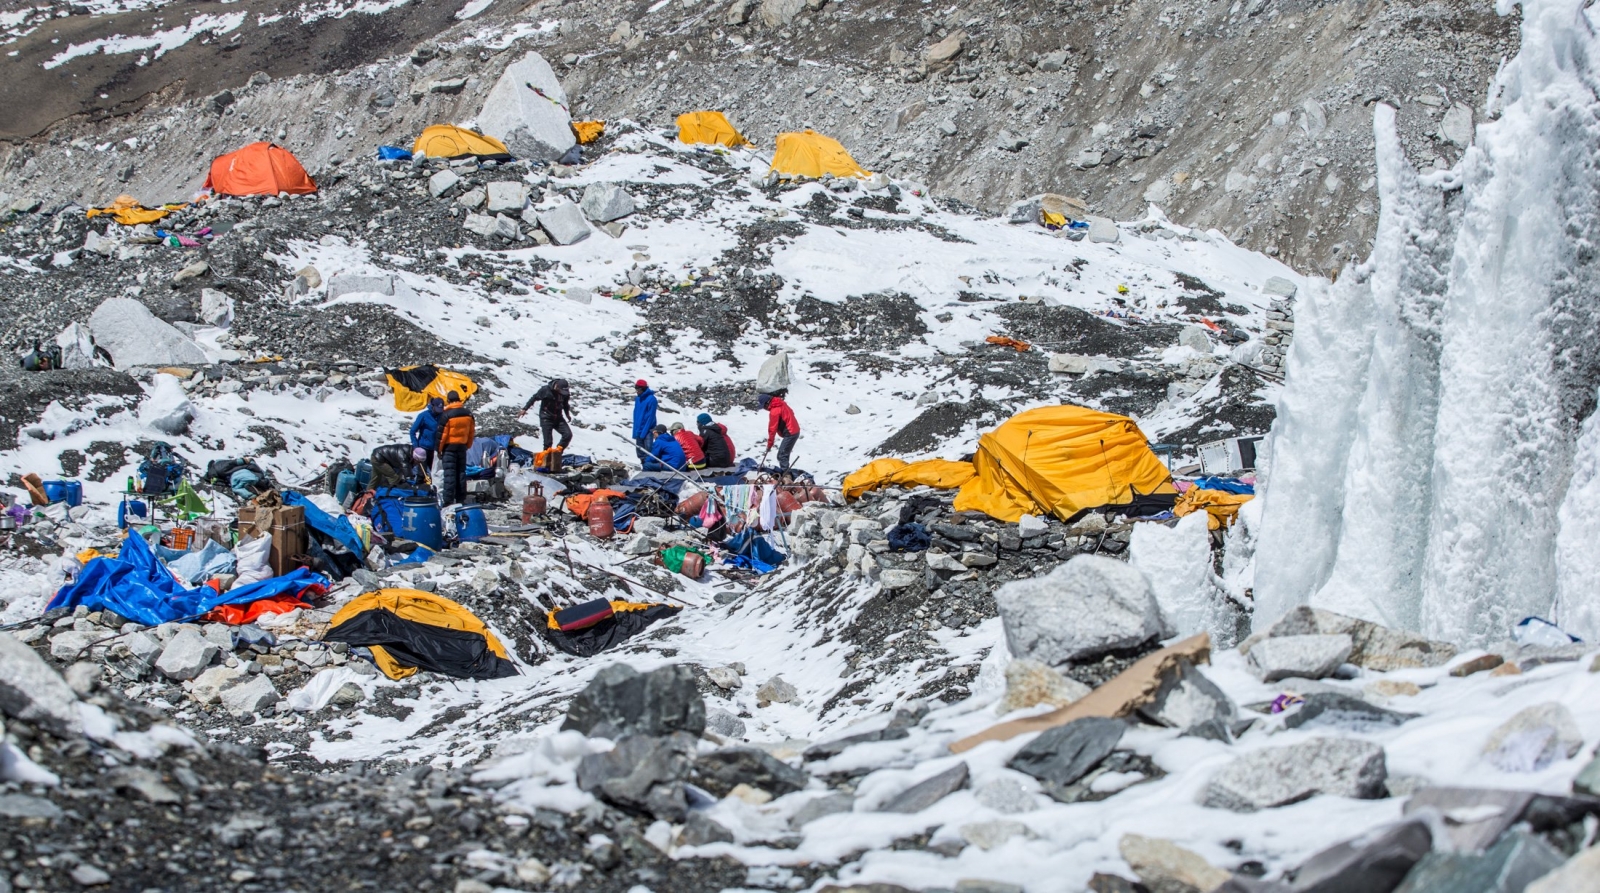 Nepal Earthquake Dramatic Aftermath Images Emerge From Everest Base Camp